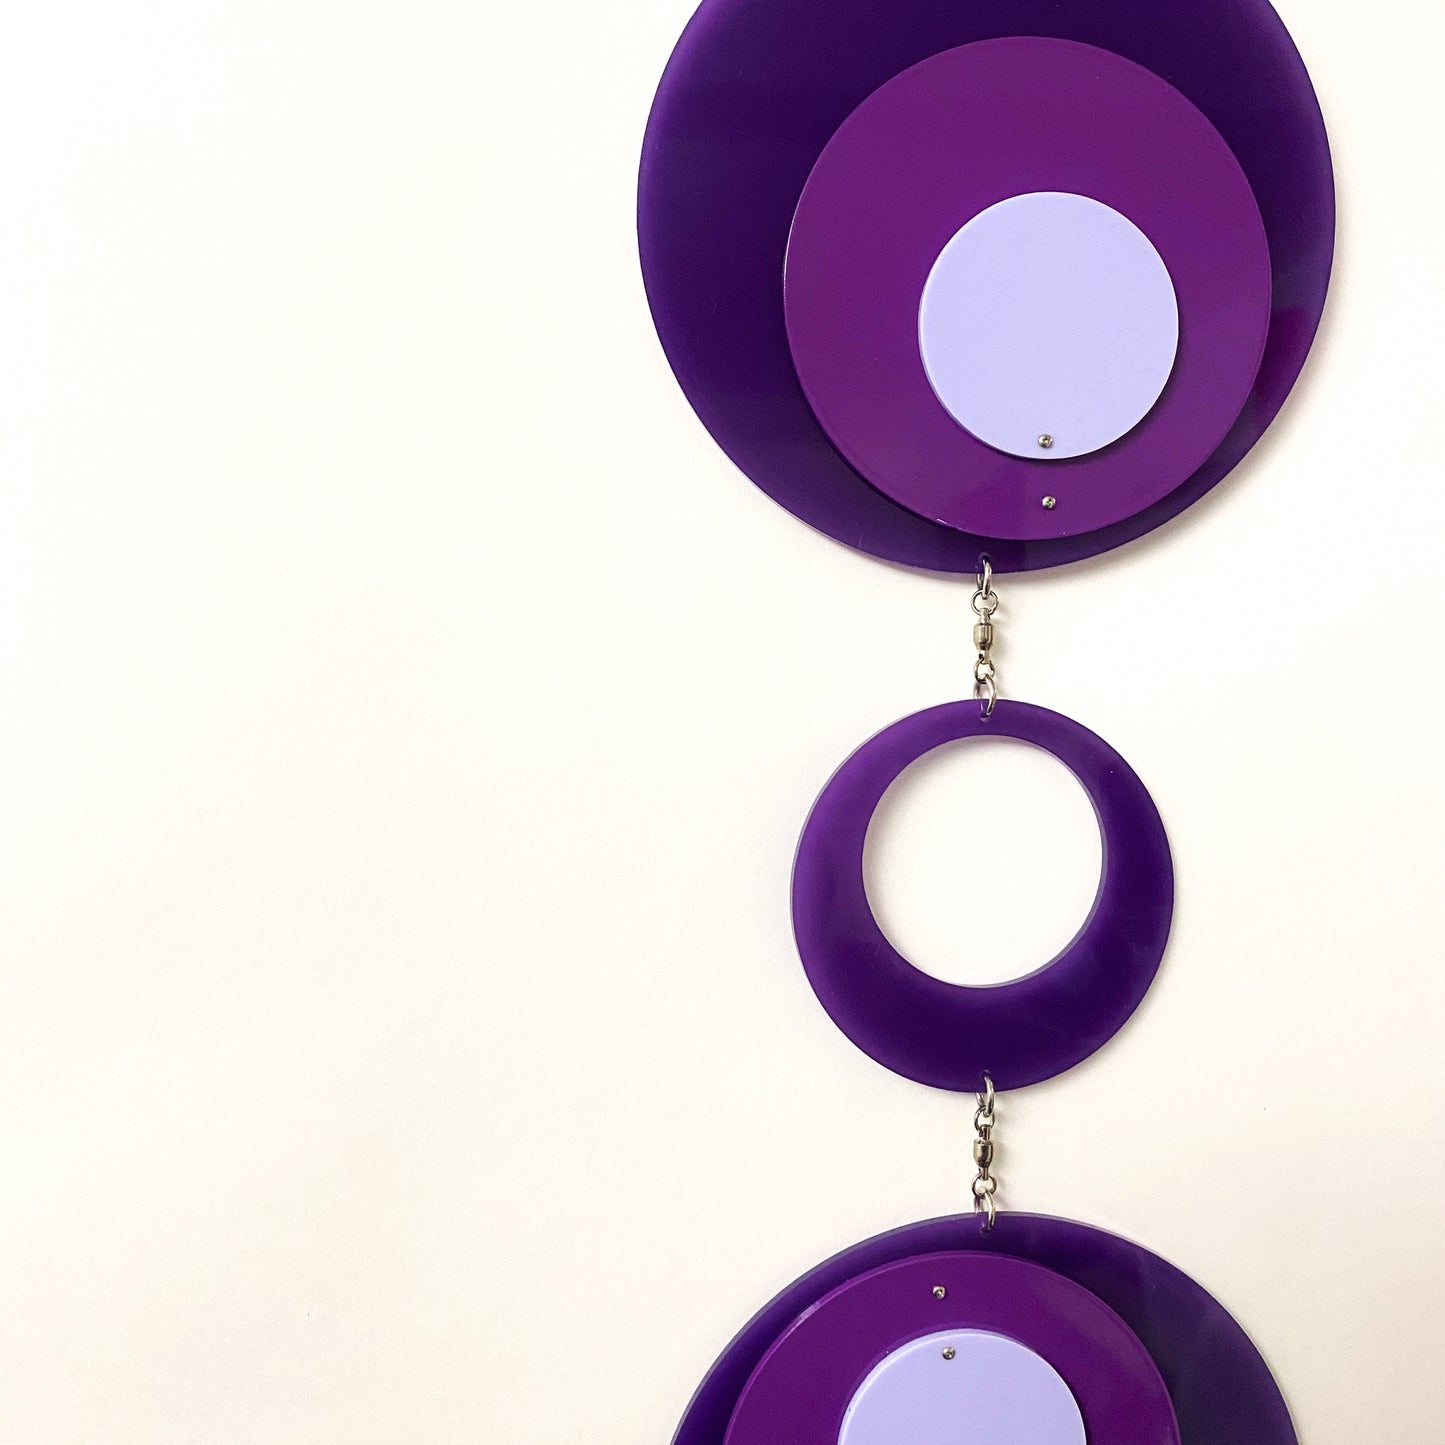 Closeup of Retro 1970s vertical kinetic art mobile in purple circle DOTS ready to ship today by AtomicMobiles.com